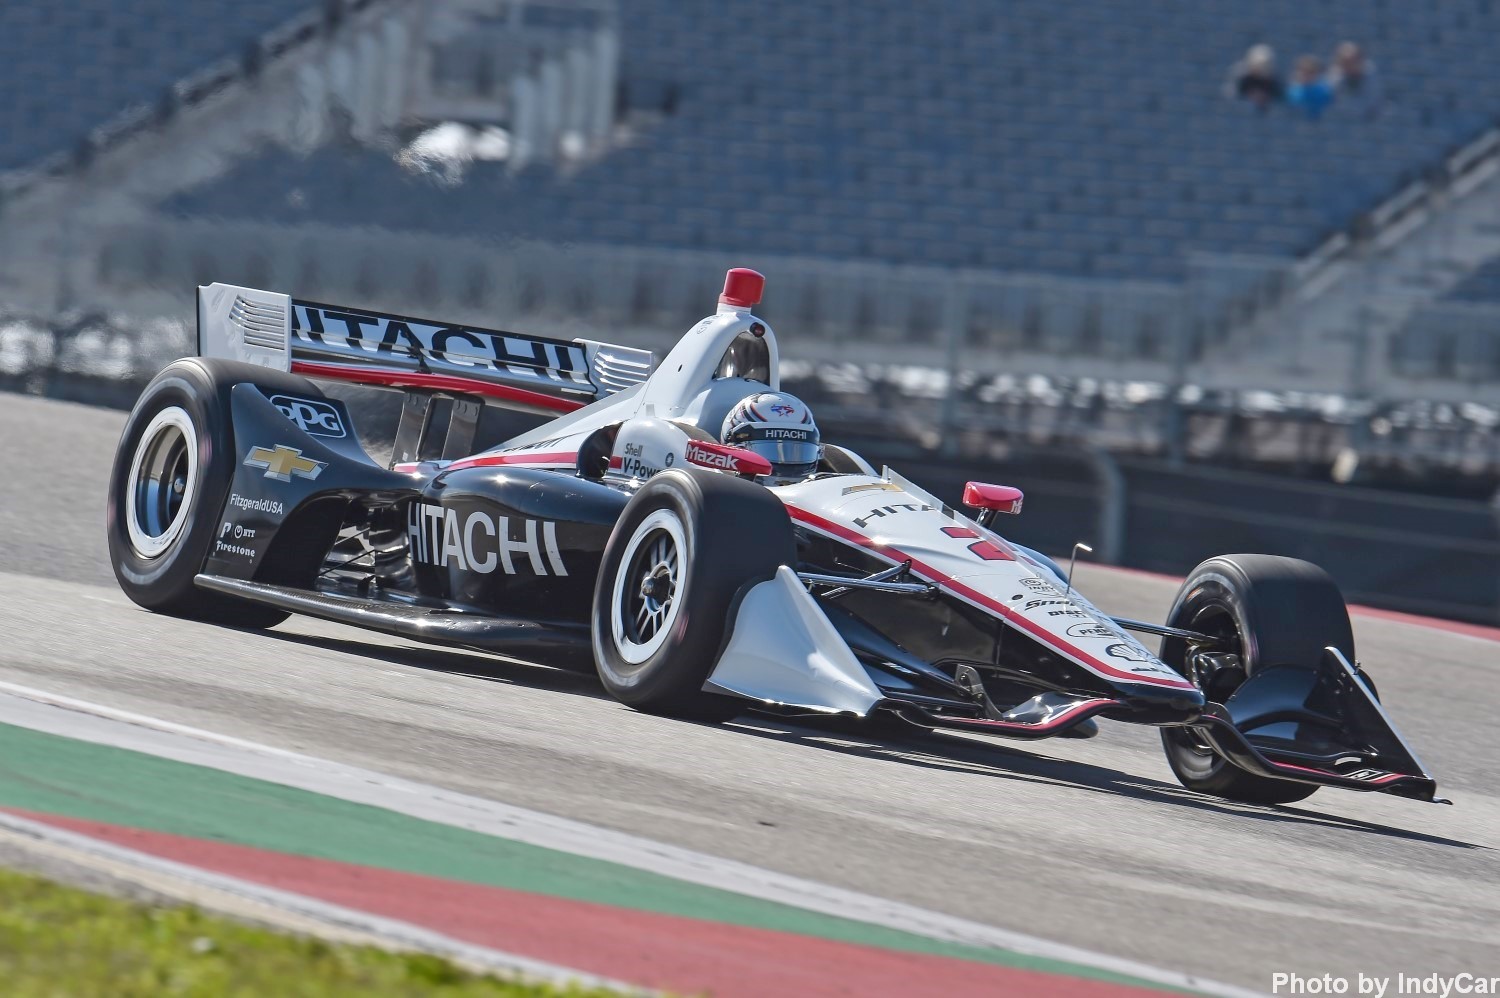 Josef Newgarden is the early favorite. He dominates on these undulating tracks